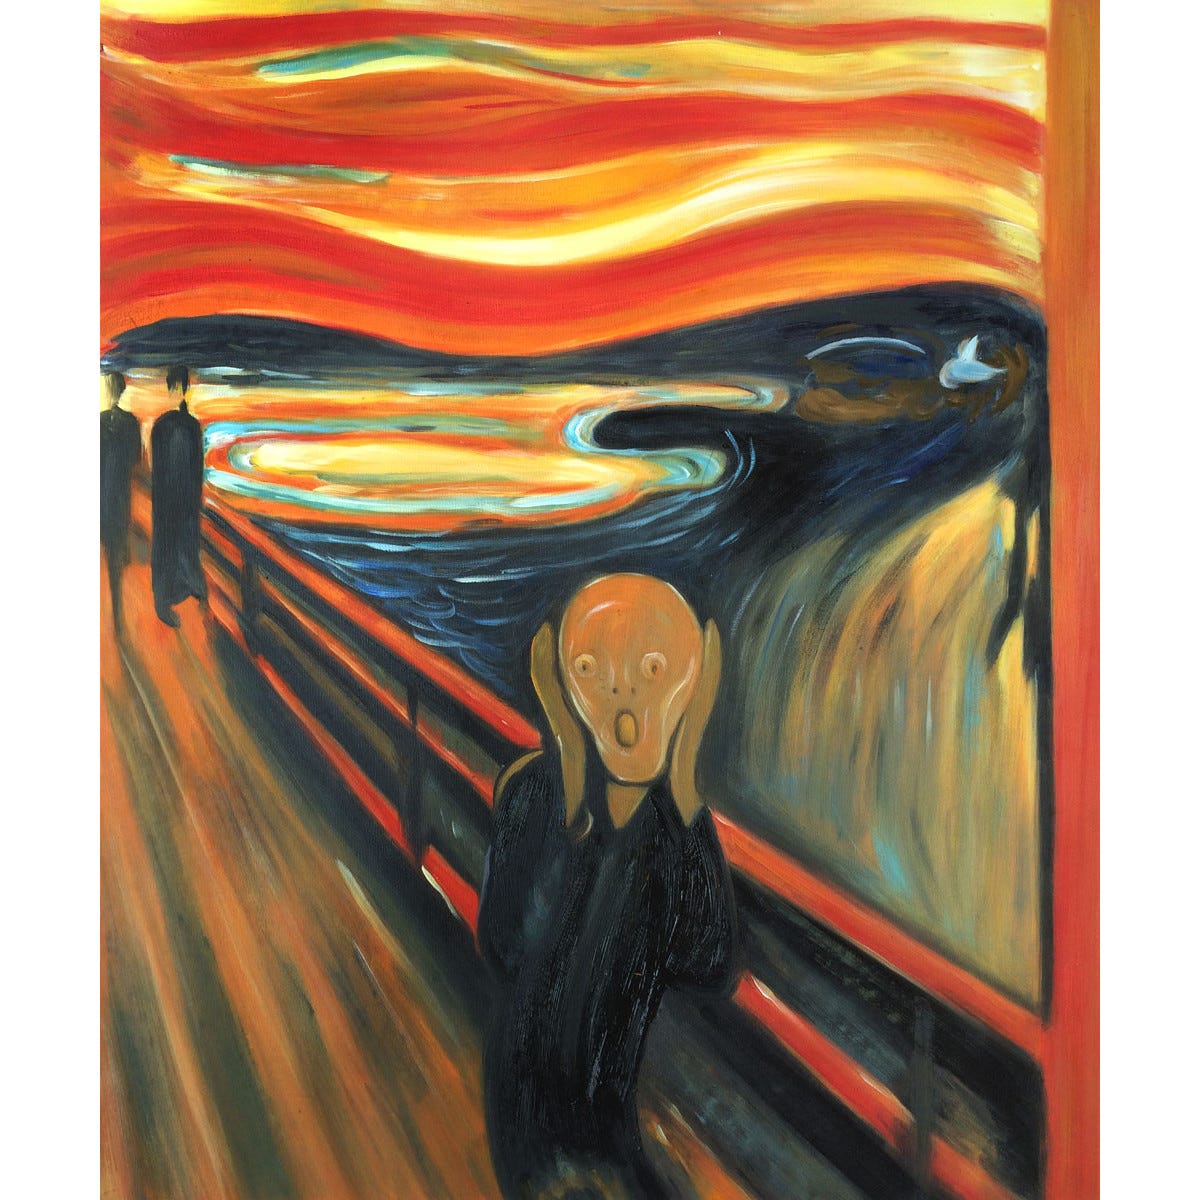 The Scream by Edward Munch Reproduction Oil Painting